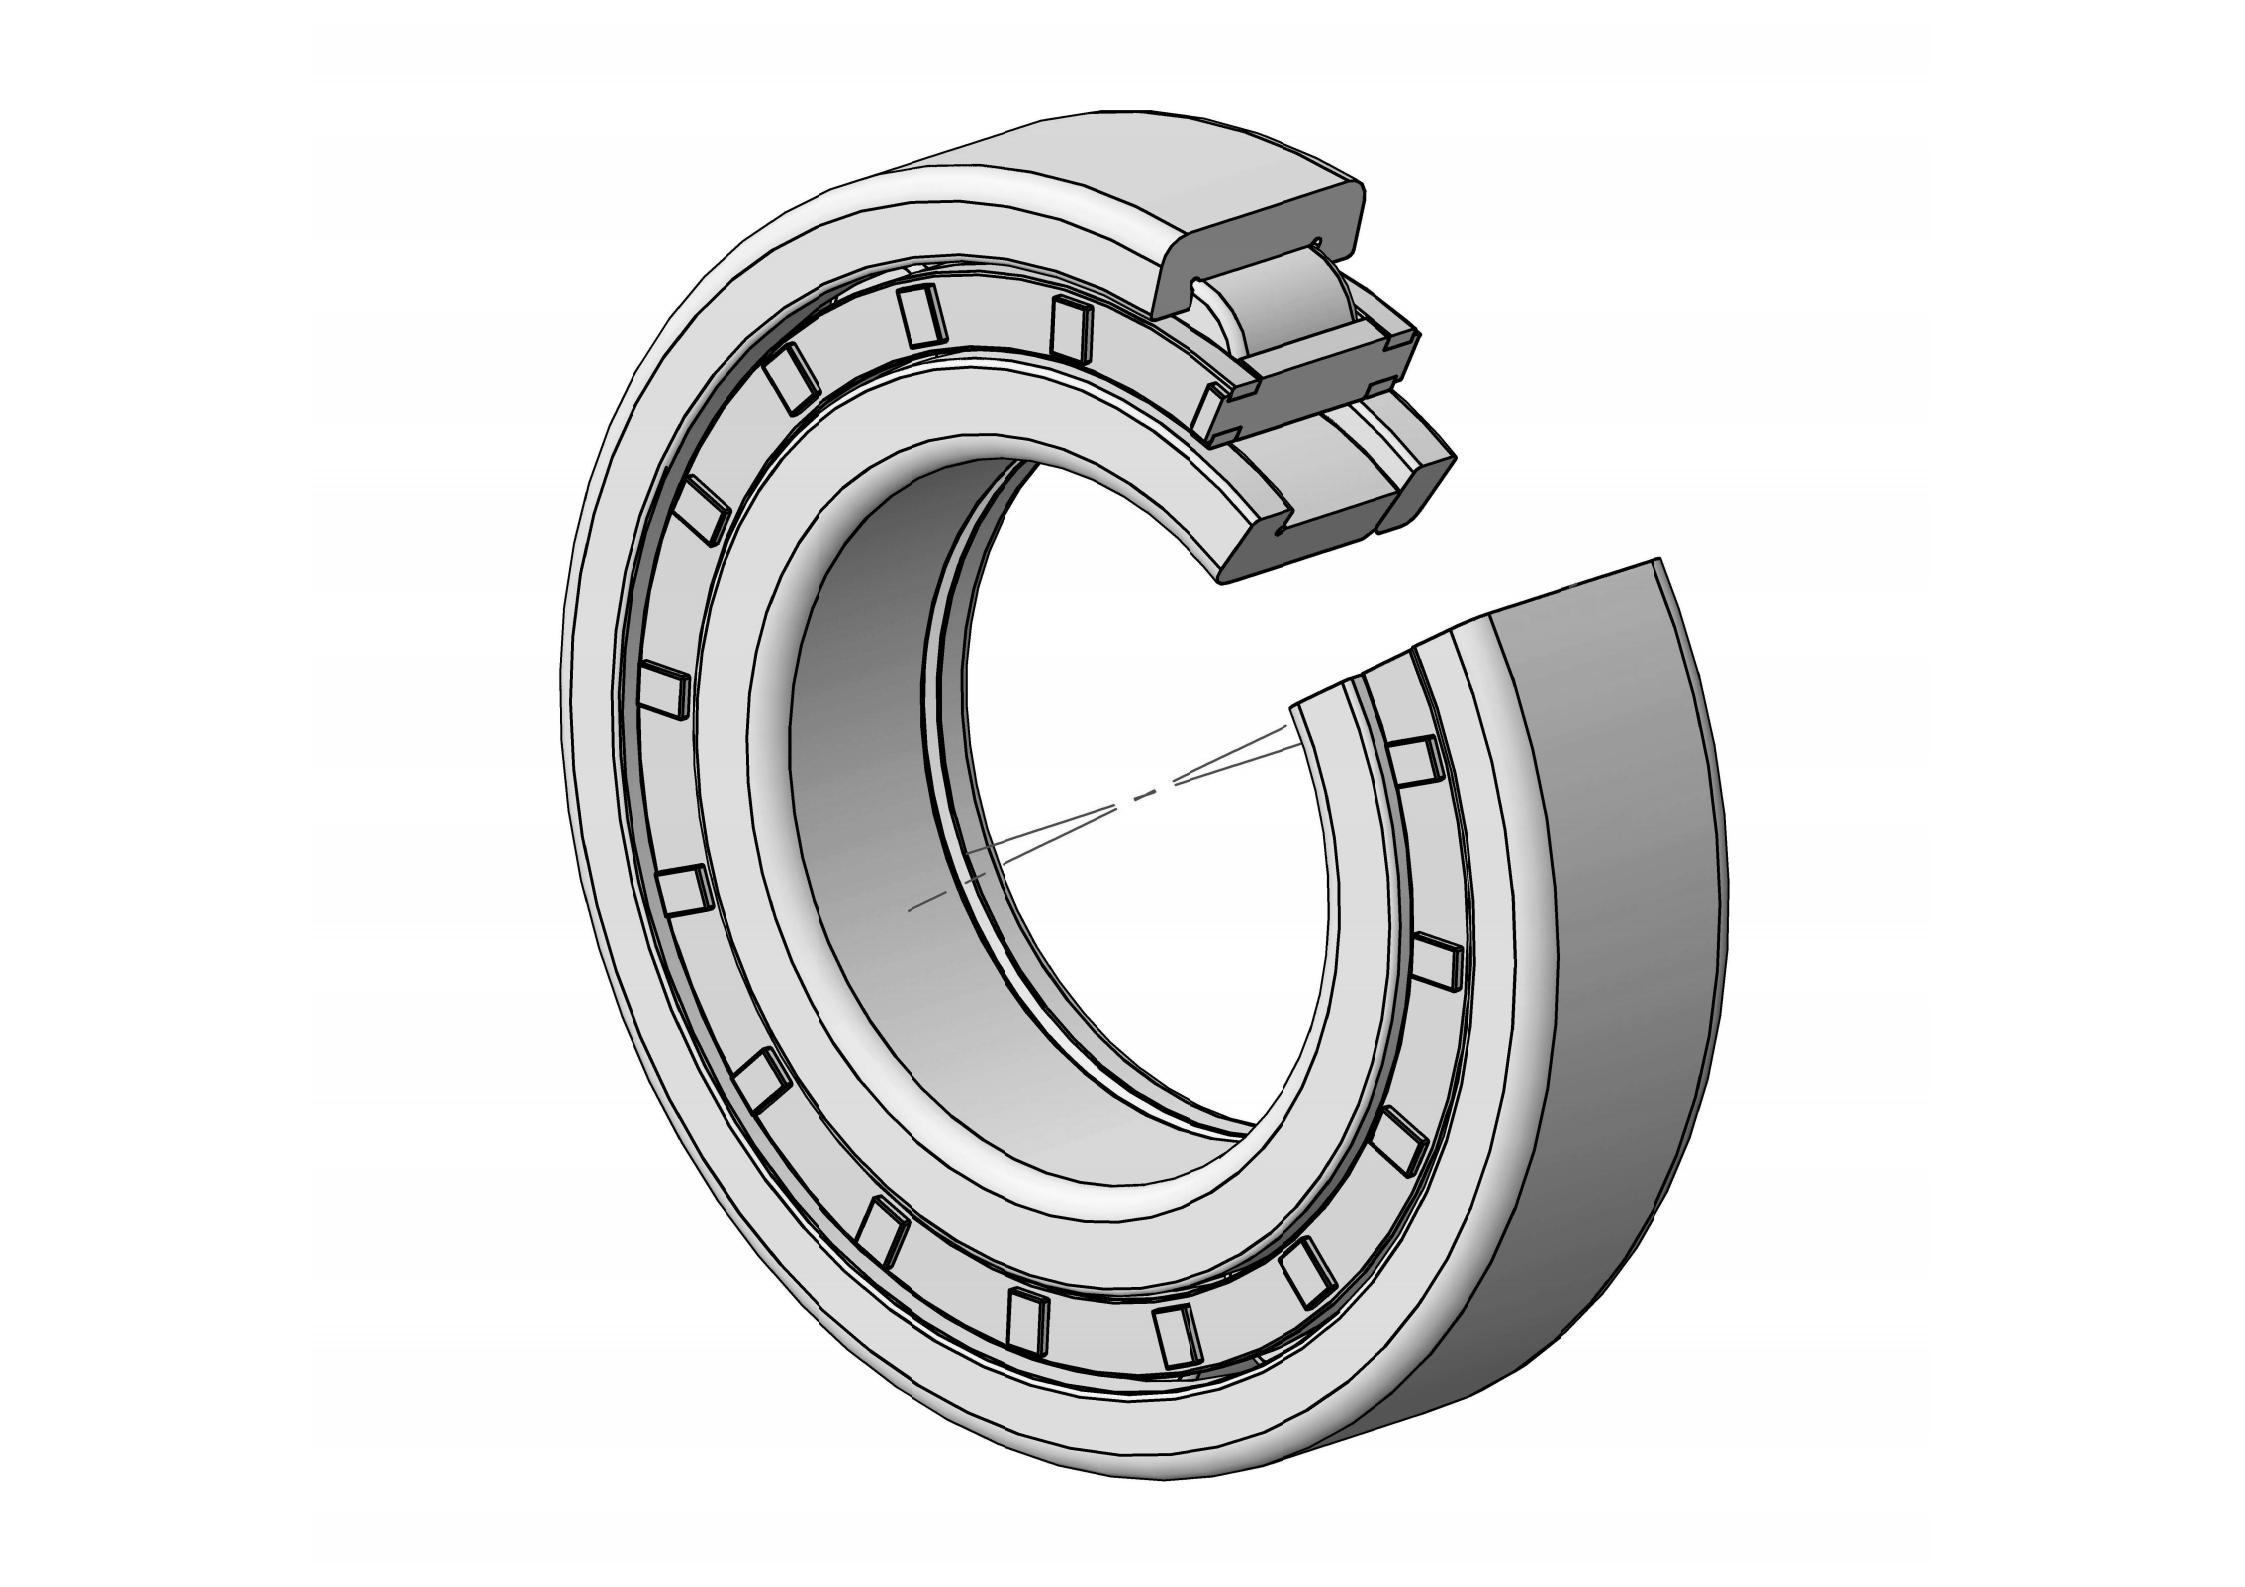 NUP2228-EM Single Row Cylindrical roller bearing 